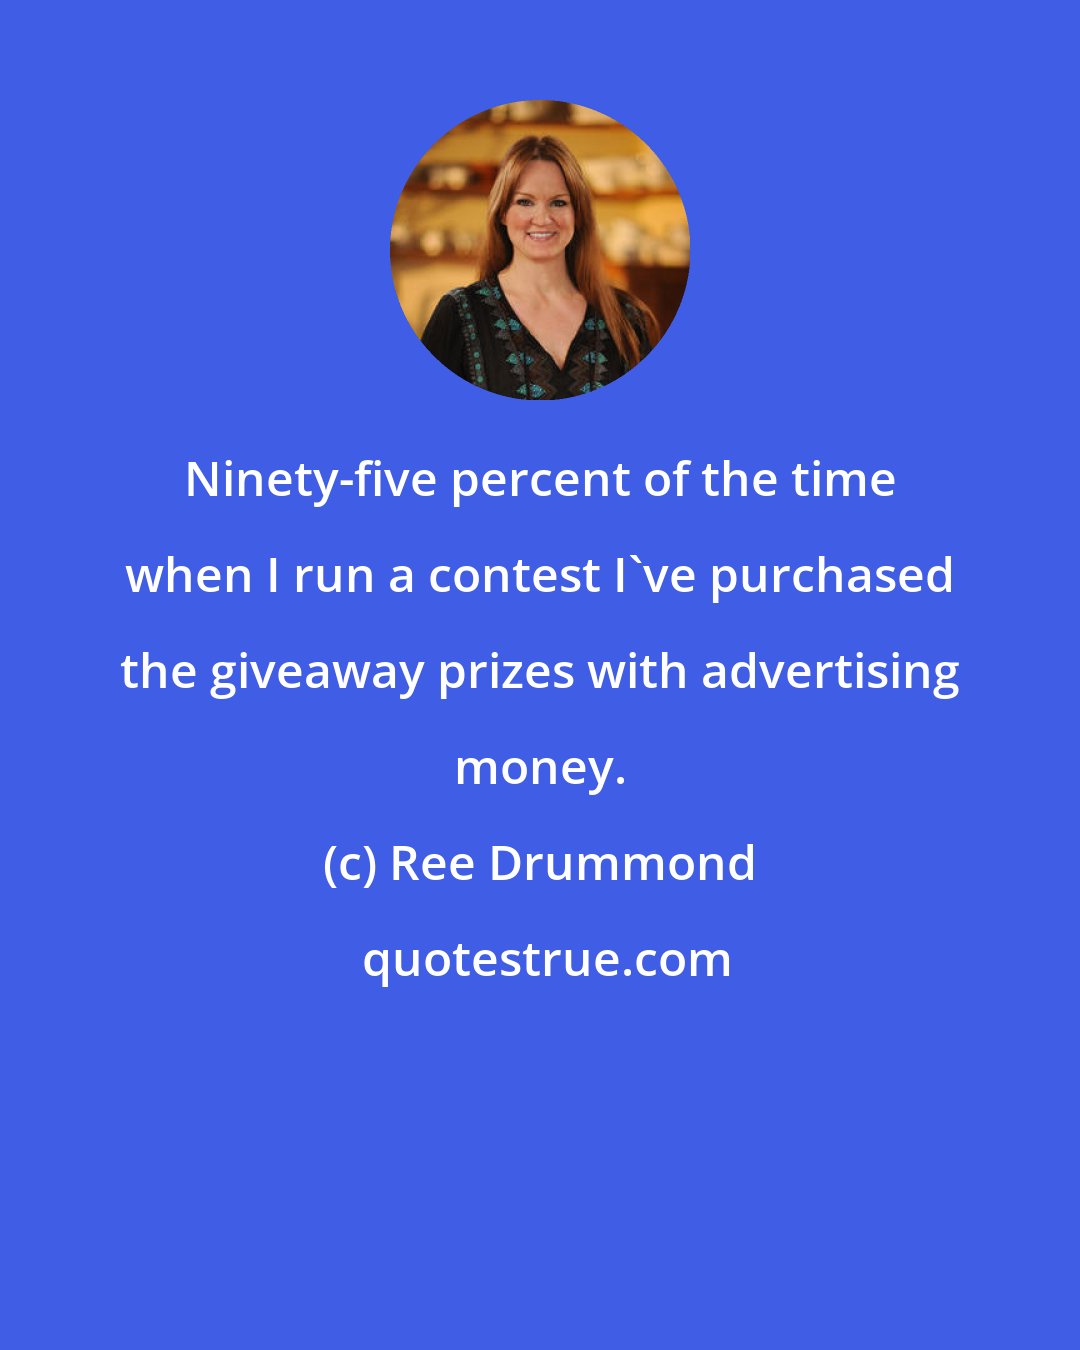 Ree Drummond: Ninety-five percent of the time when I run a contest I've purchased the giveaway prizes with advertising money.